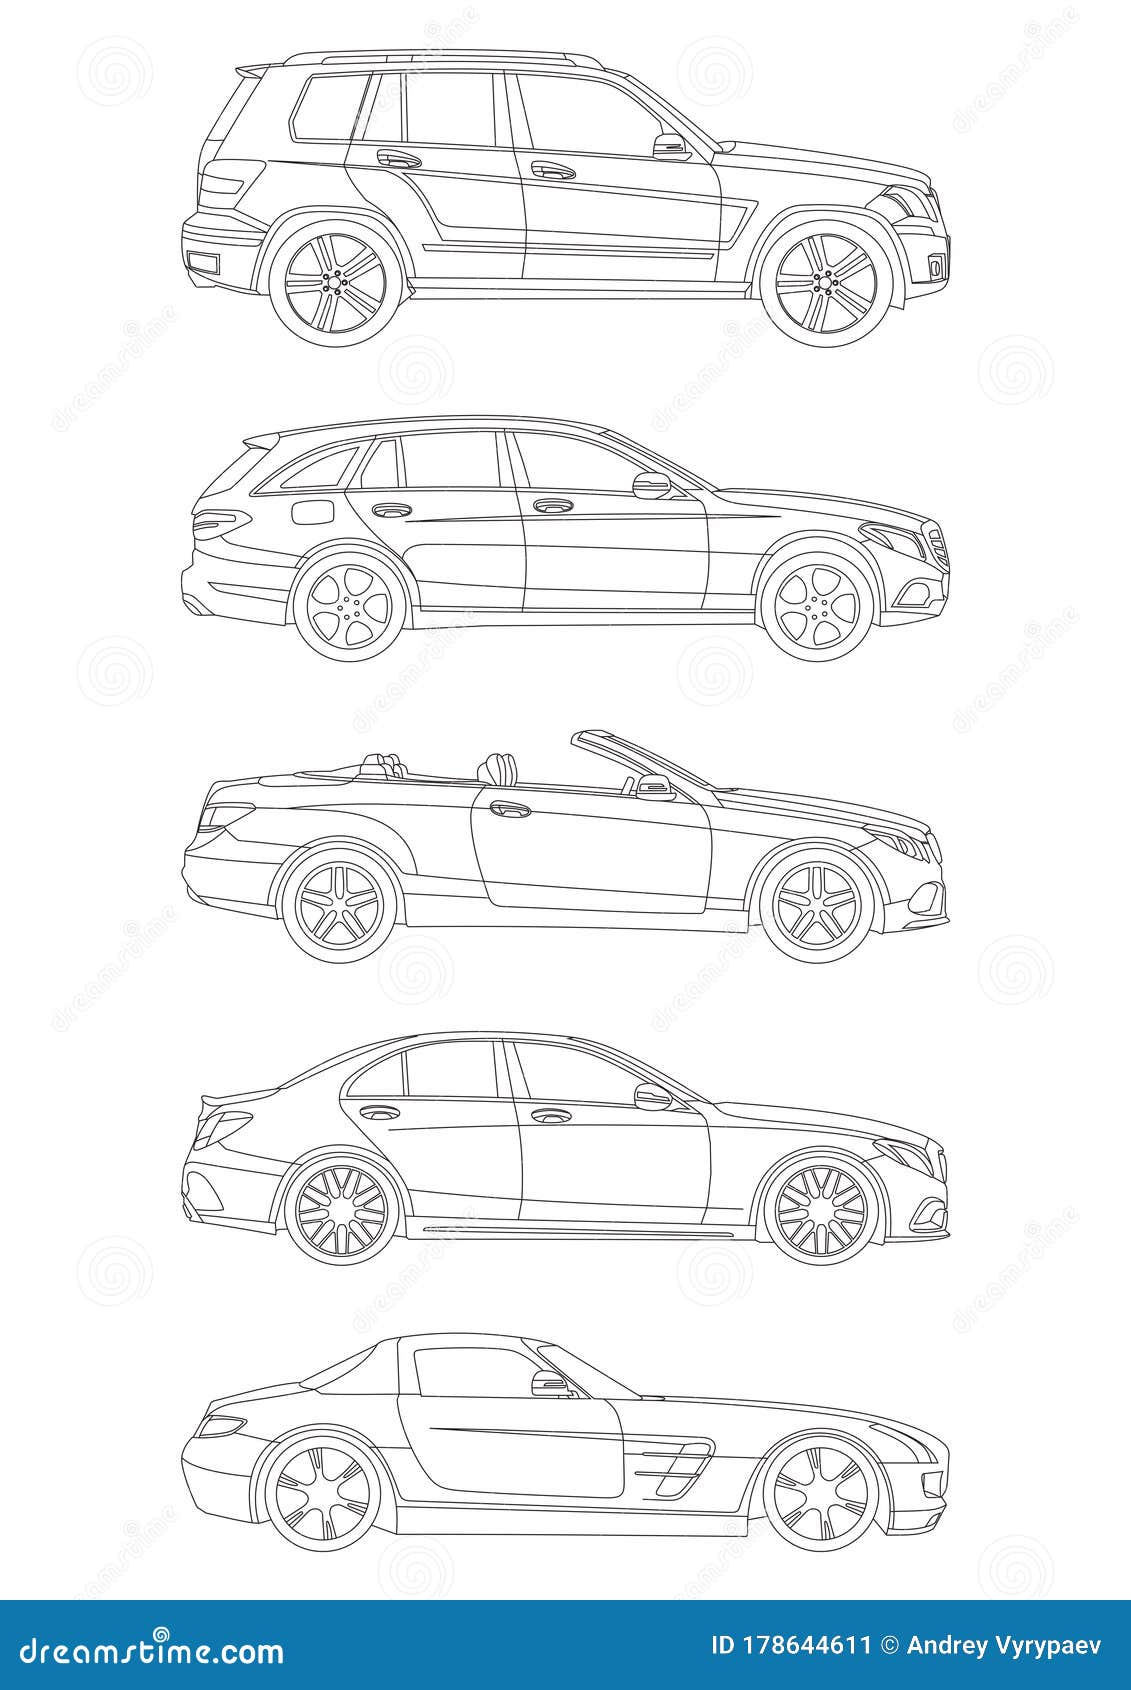 Mercedes Benz Drawing Pic - Drawing Skill